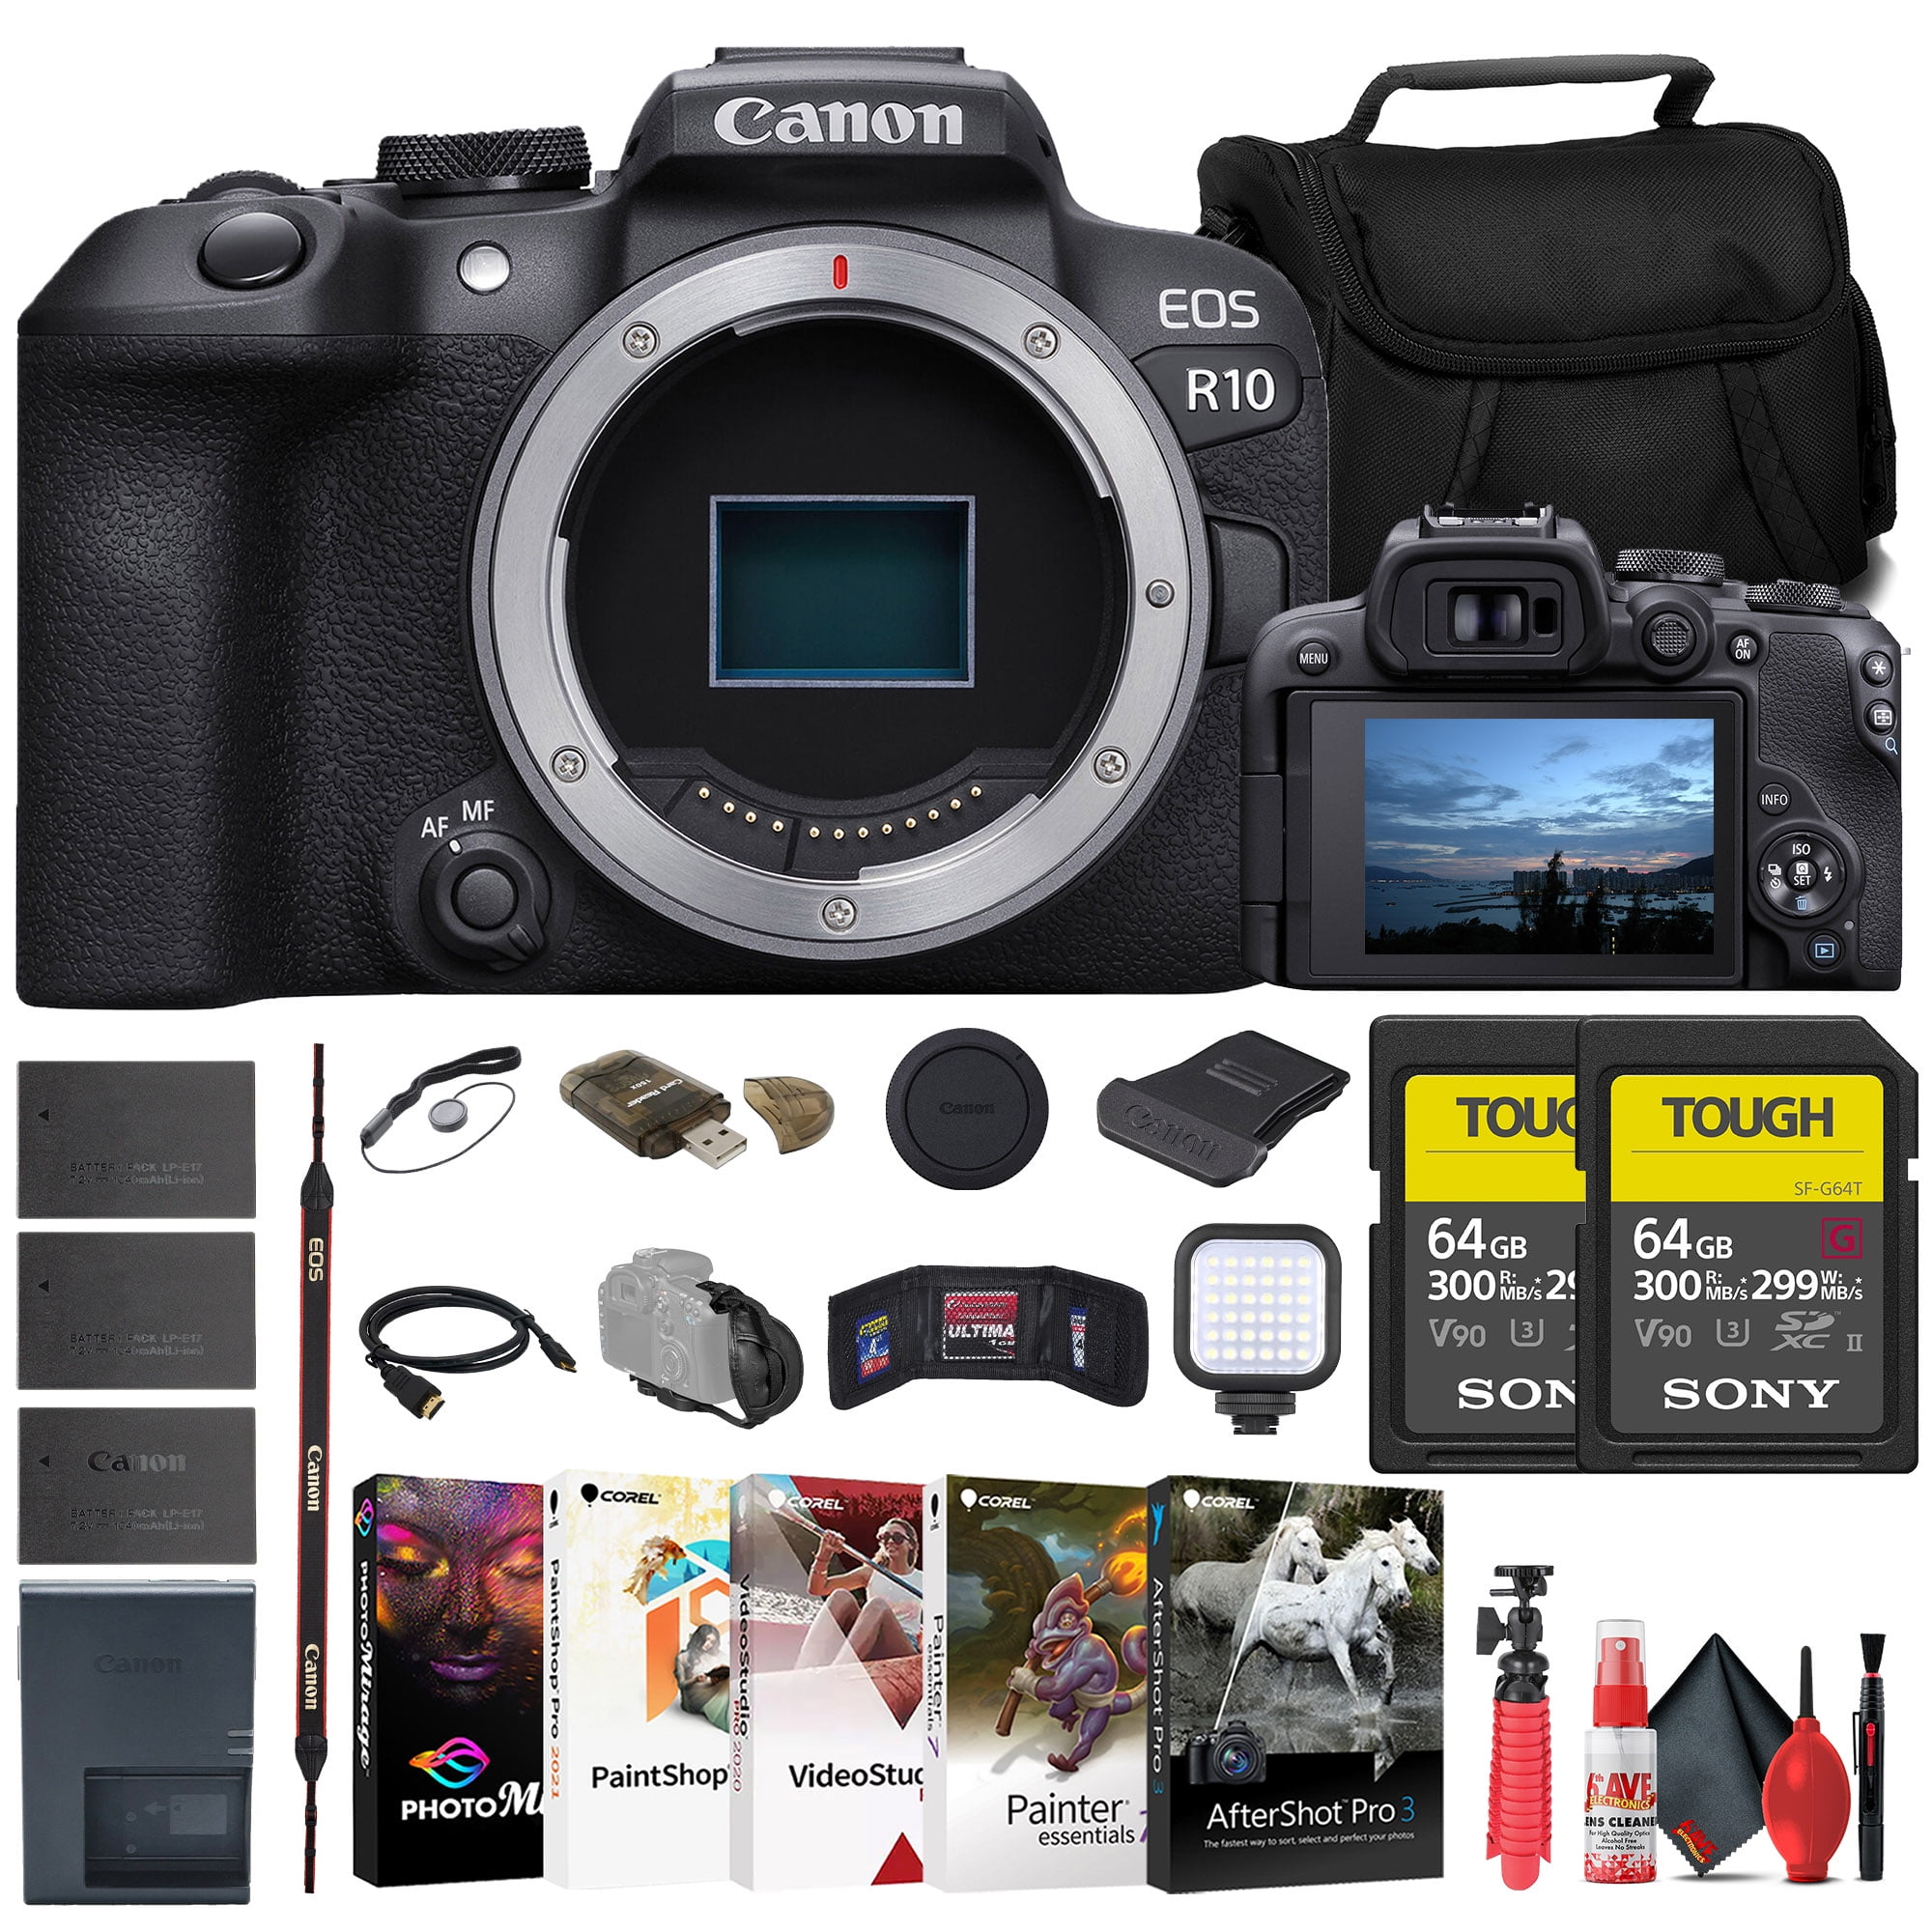 Canon EOS R50 Mirrorless Camera with 18-45mm Lens (Black) (5811C012) + 64GB  Memory Card + Bag + Charger + LPE17 Battery + Card Reader + Memory Wallet